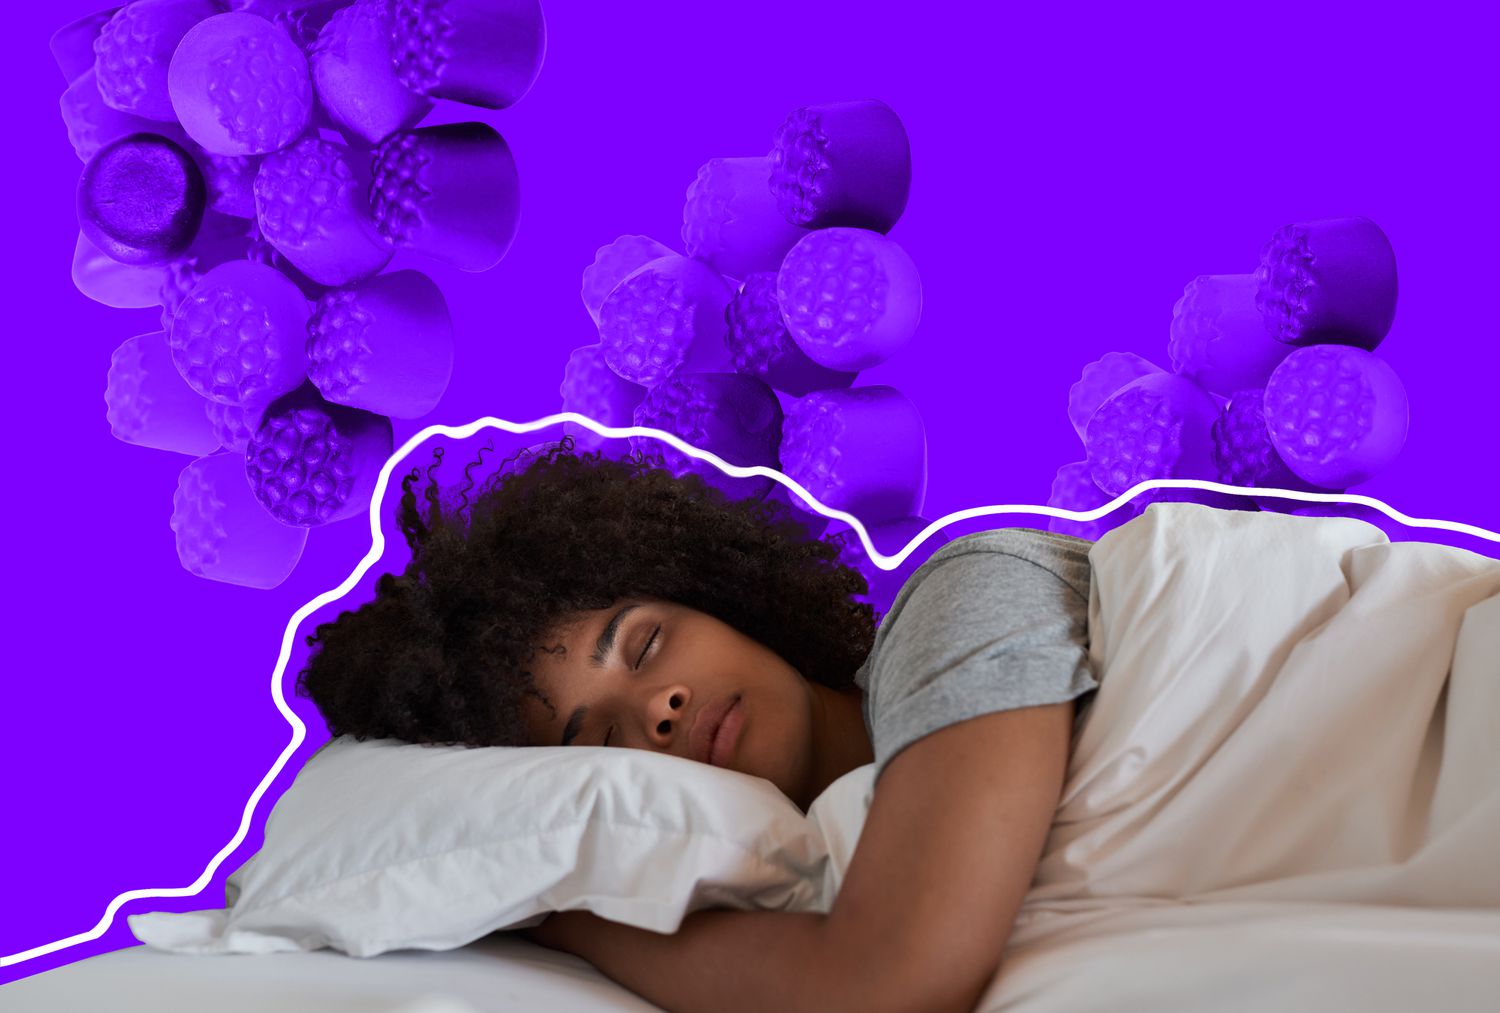 women sleeping in bed with melatonin is the background